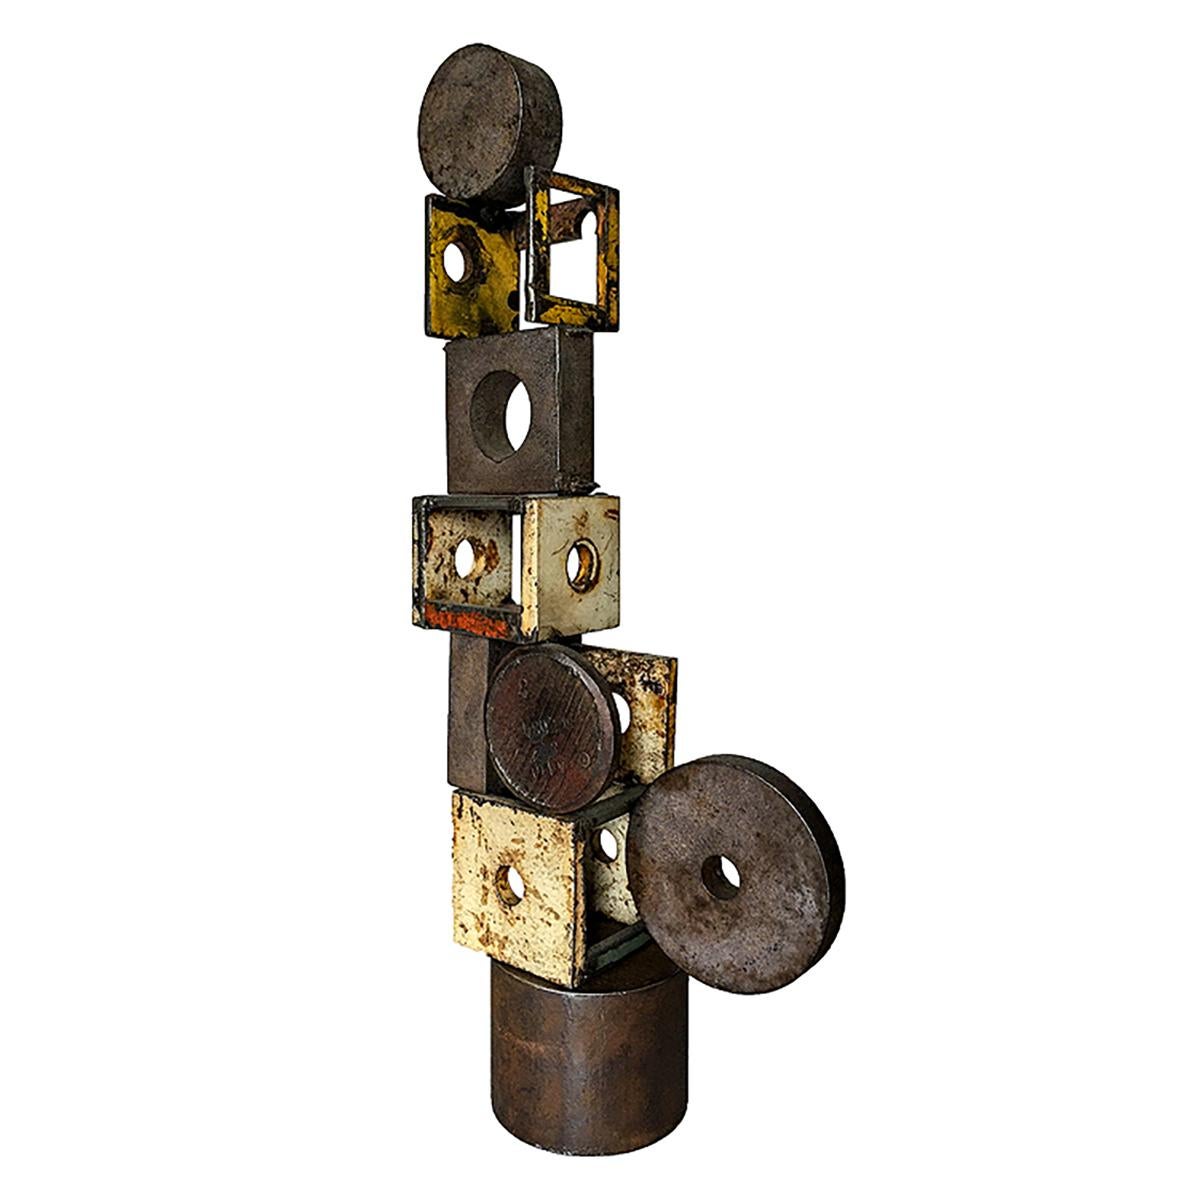 Object 1983, Steel Structure, Welded Sculptural Object Made w/ Salvaged Steel - Sculpture by Jim Rose